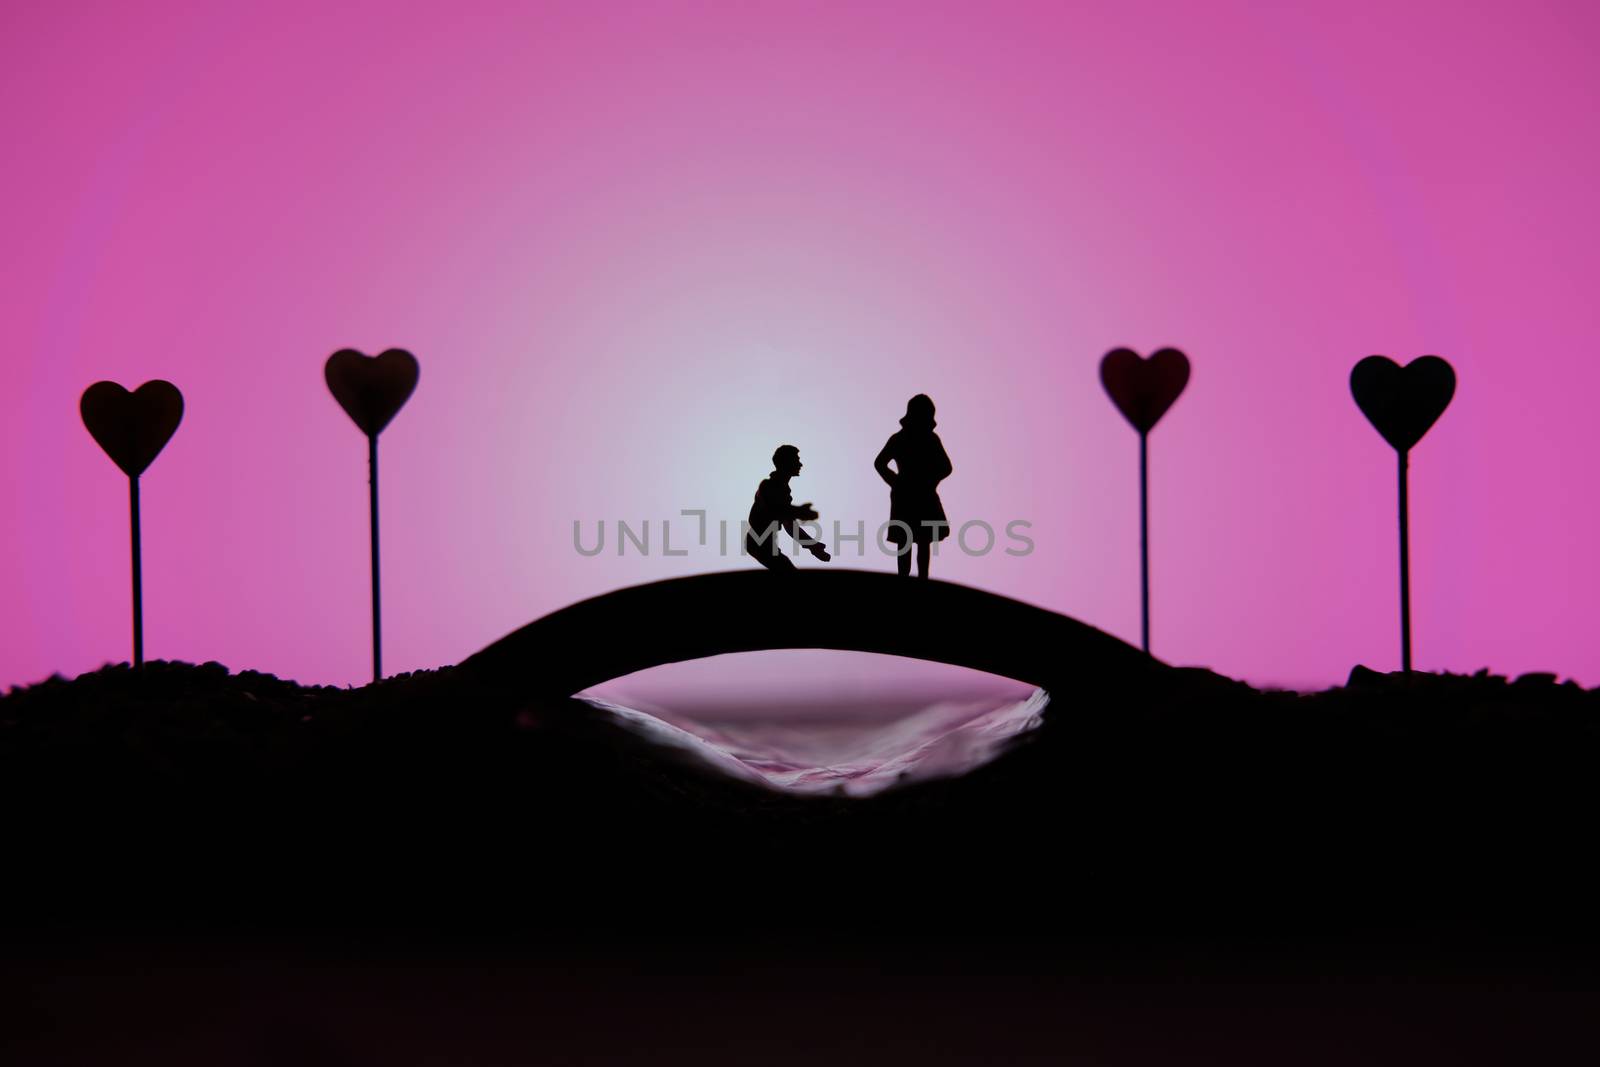 miniature people / toy photography - conceptual valentine holiday illustration. A man proposing a girl silhouette above the bridge with heart lamp